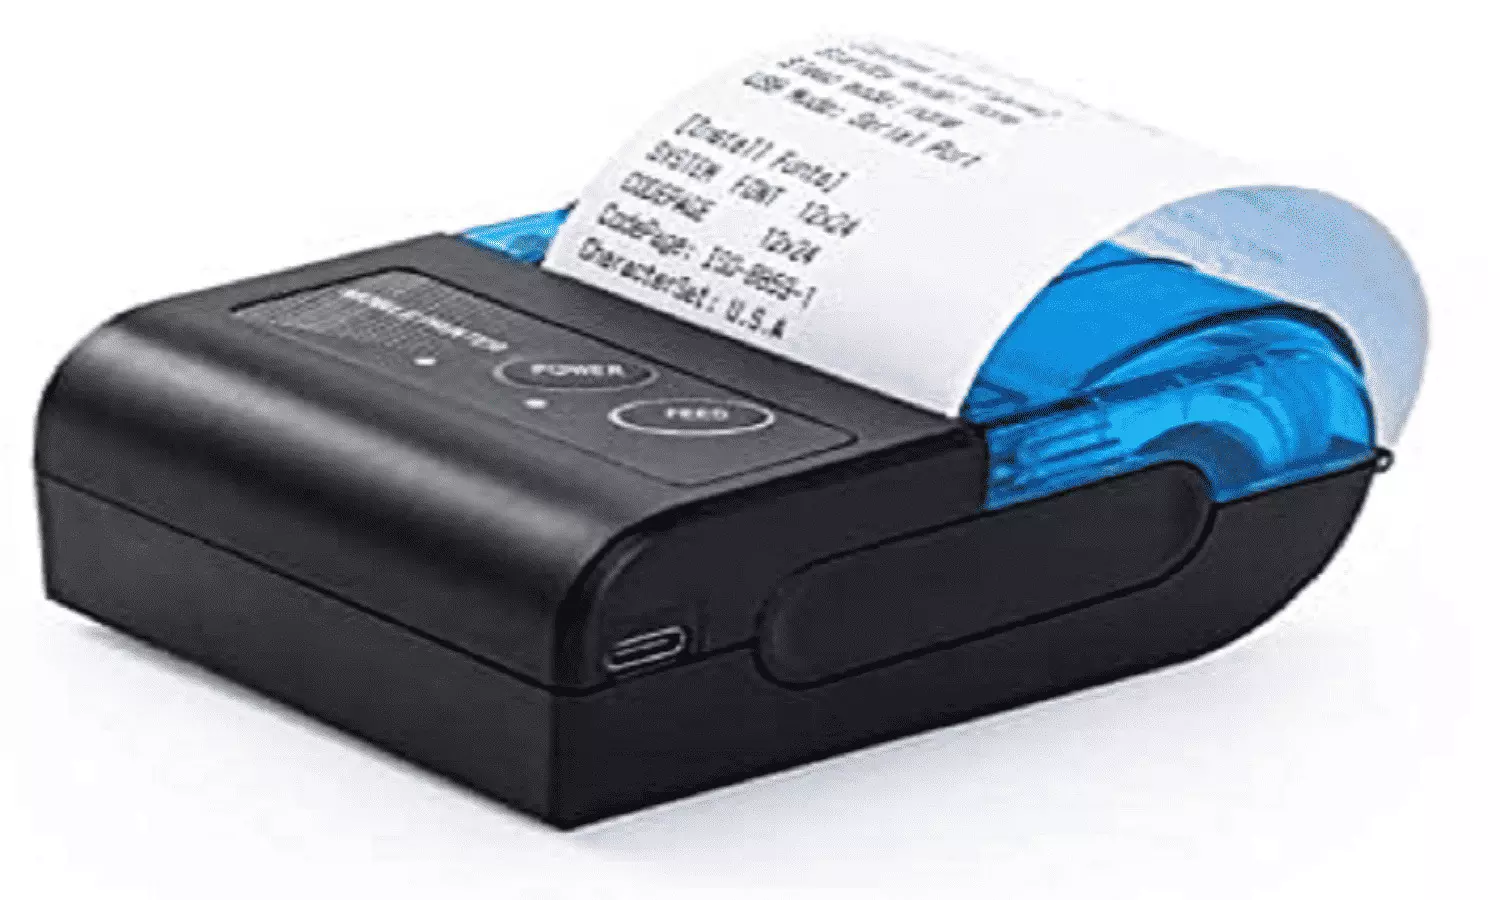 Best Thermal Printers For Bill